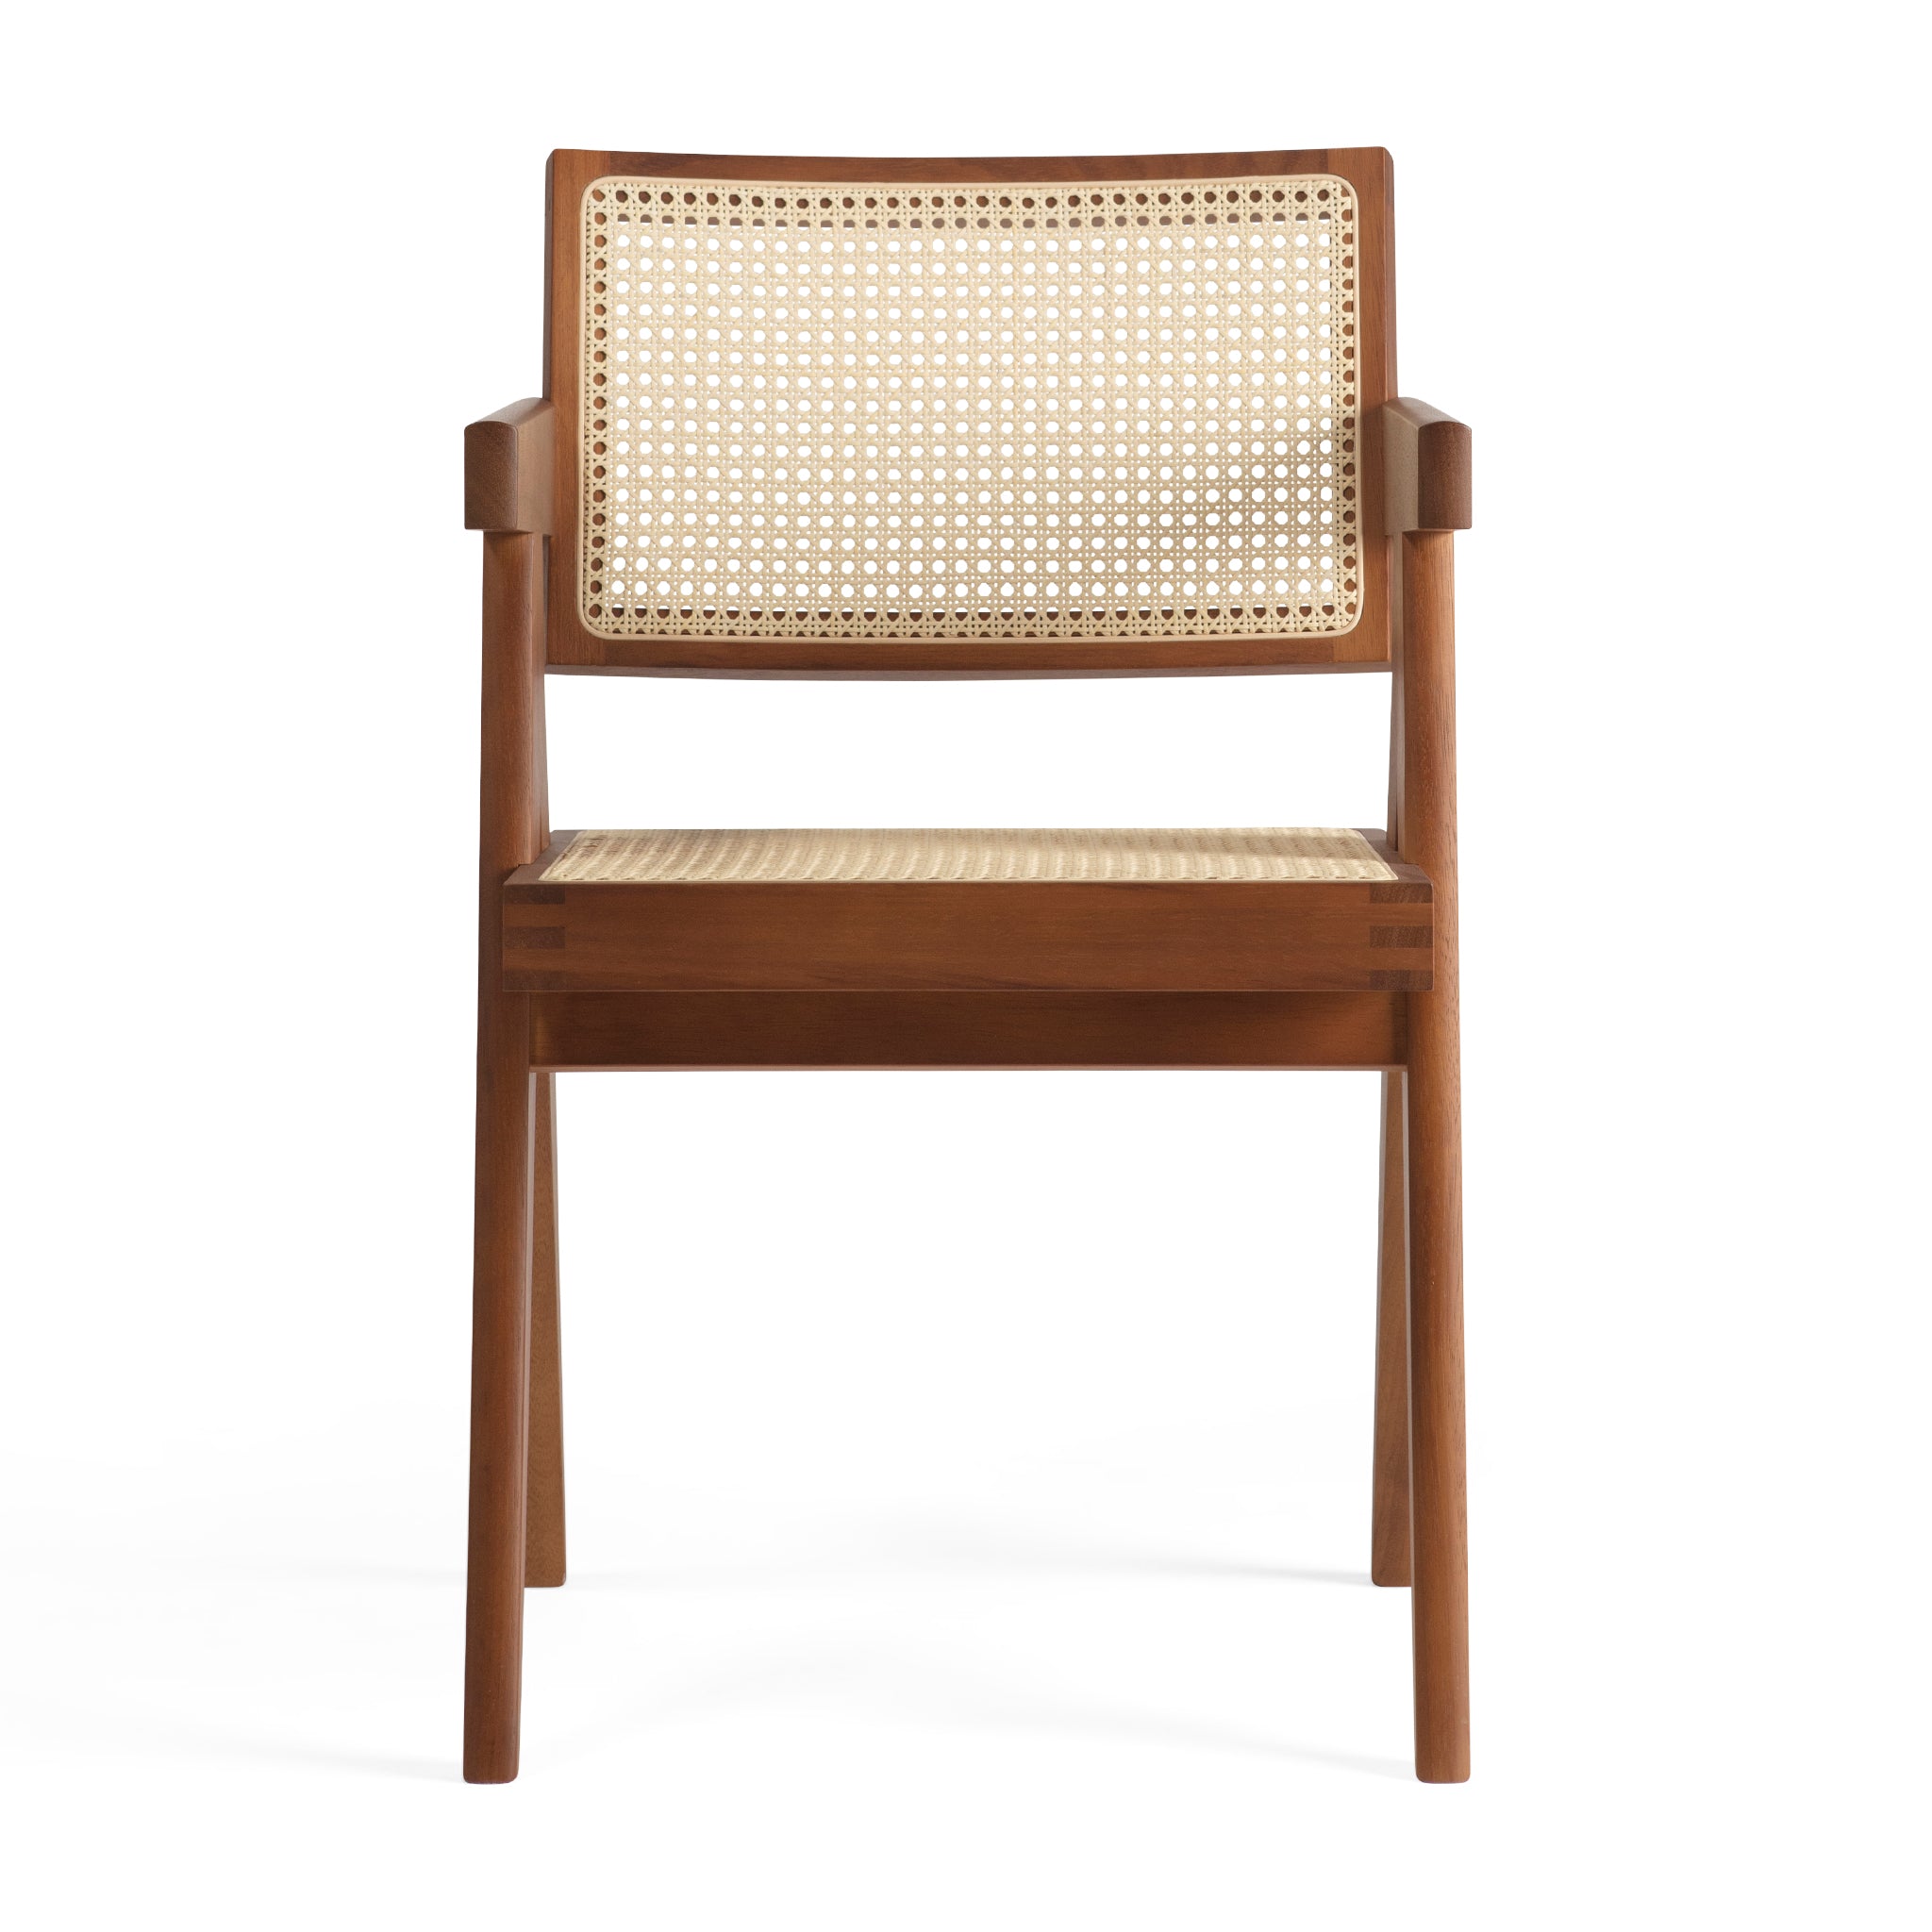 Front view of an authentic chandigarh armchair, pierre jeanneret era, teak frame, viennese cane, produced by Klarel #K34-1